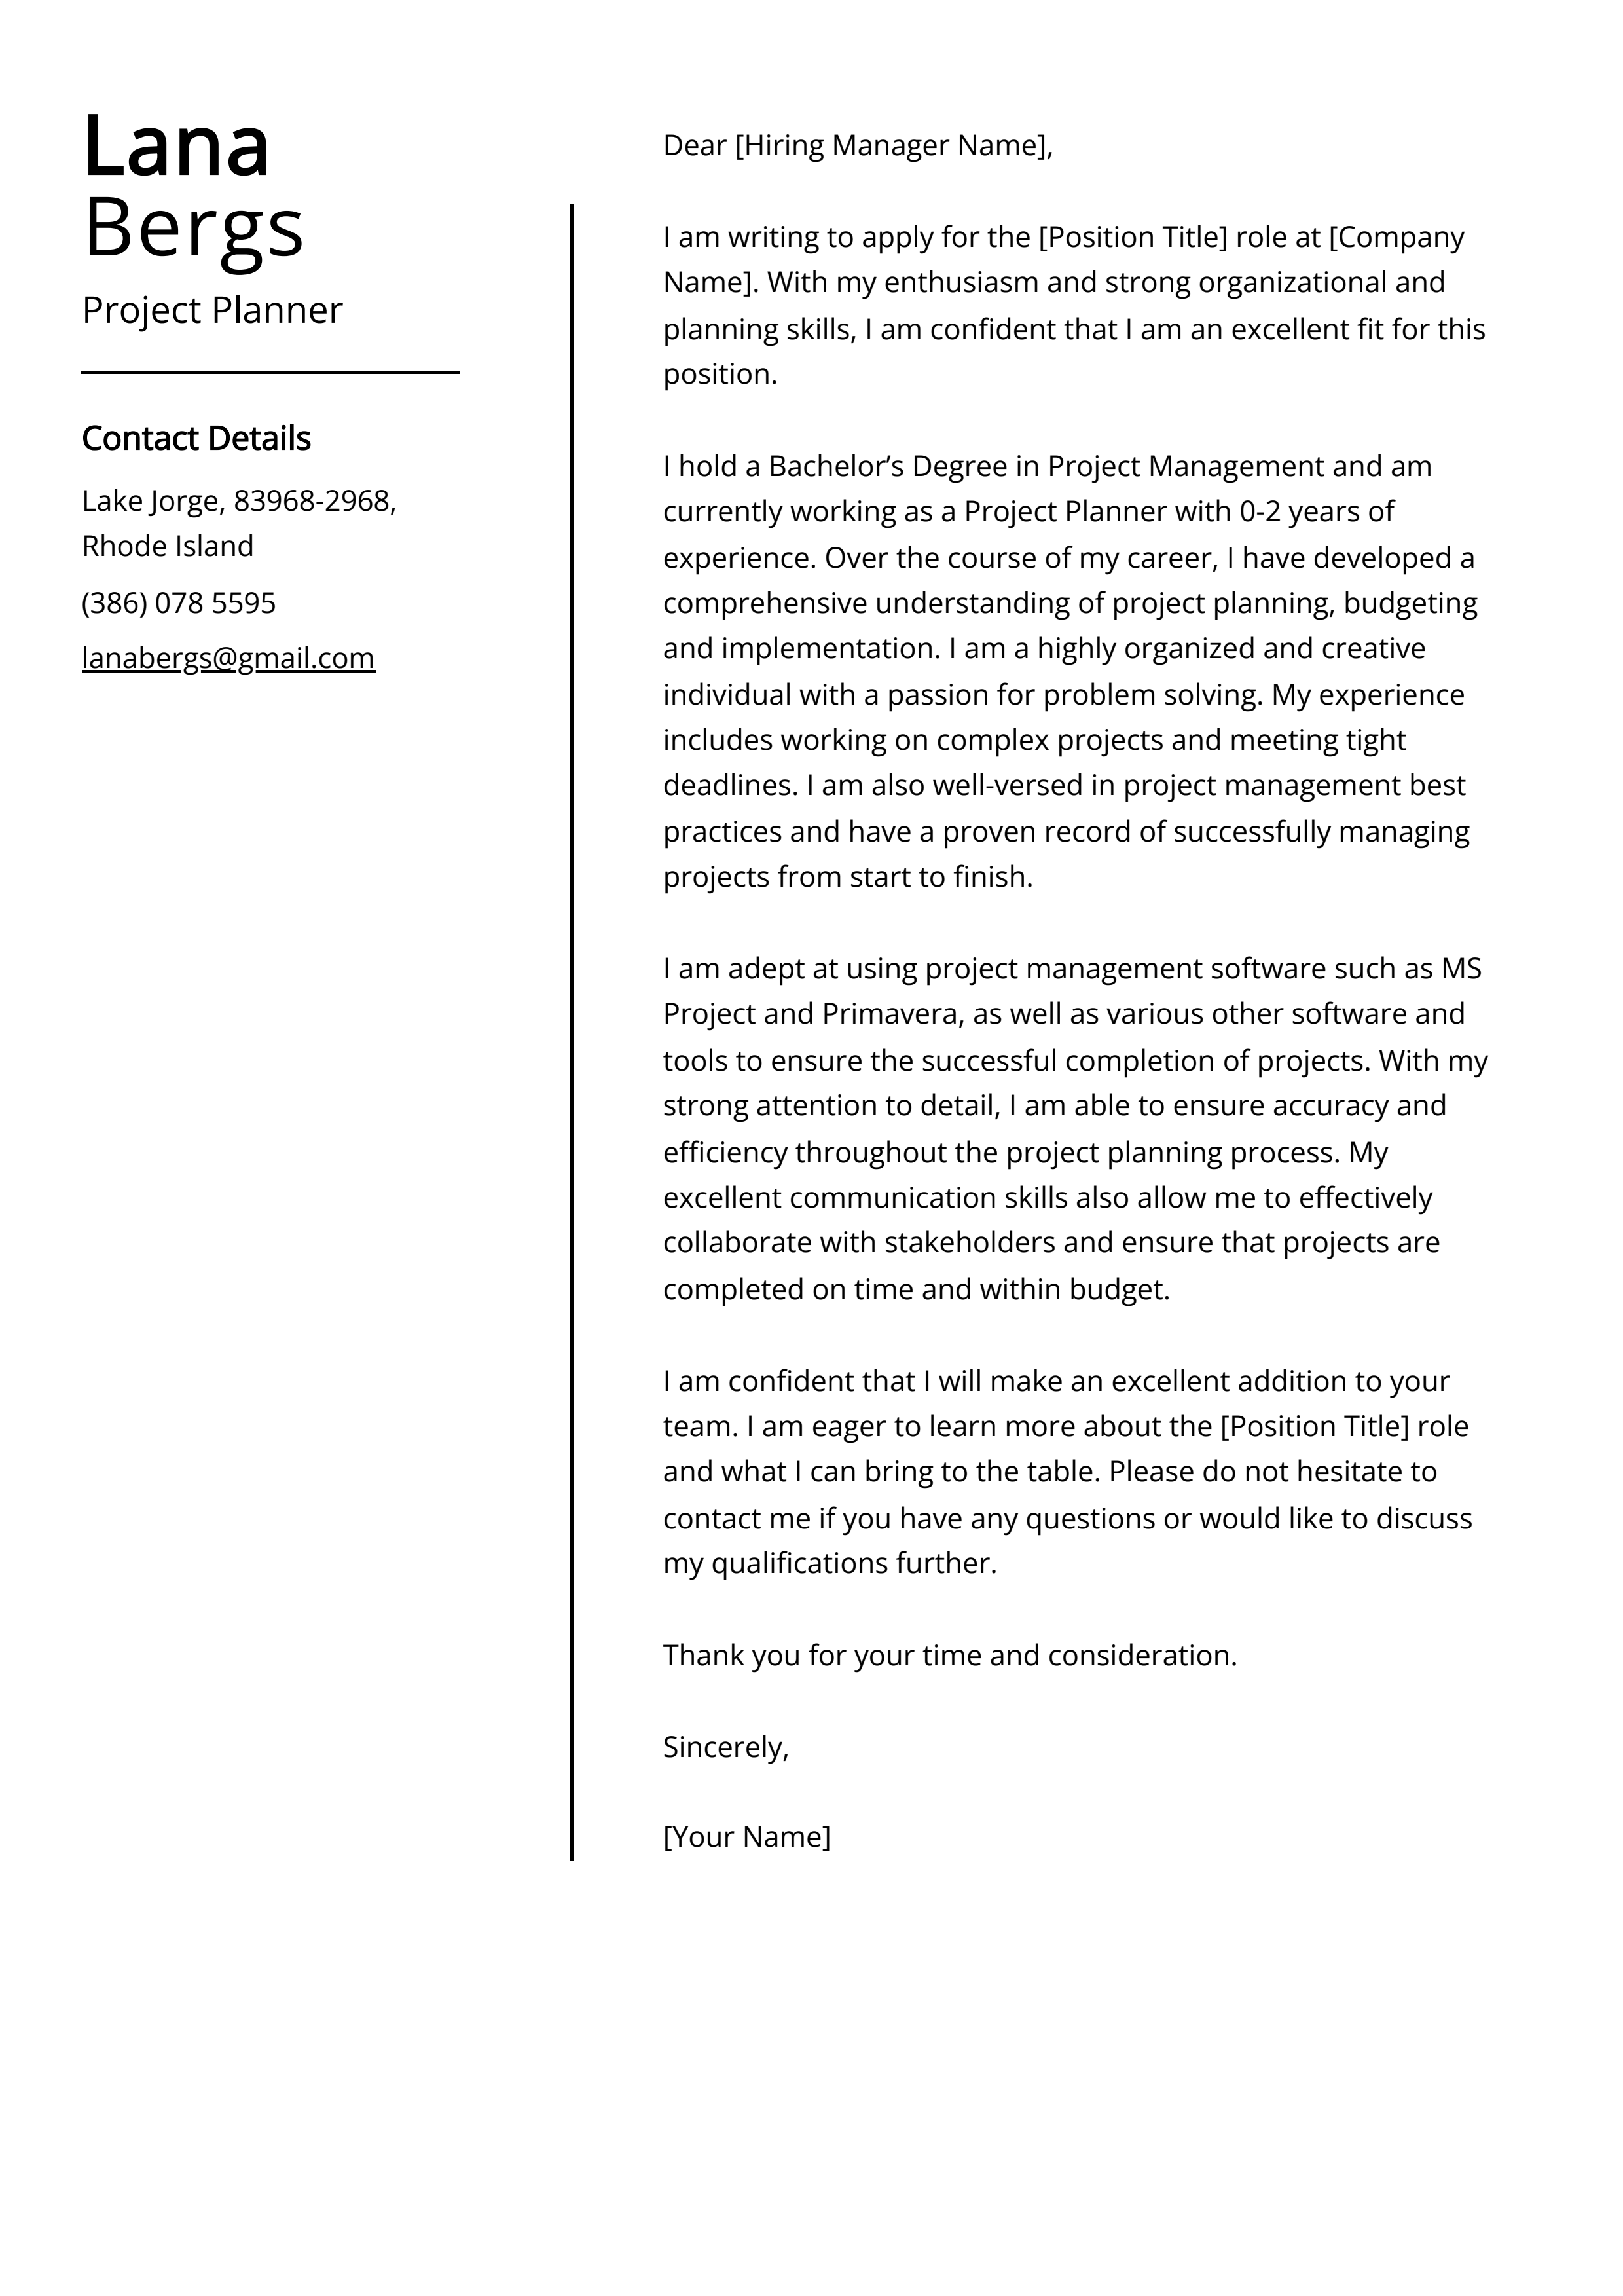 Project Planner Cover Letter Example